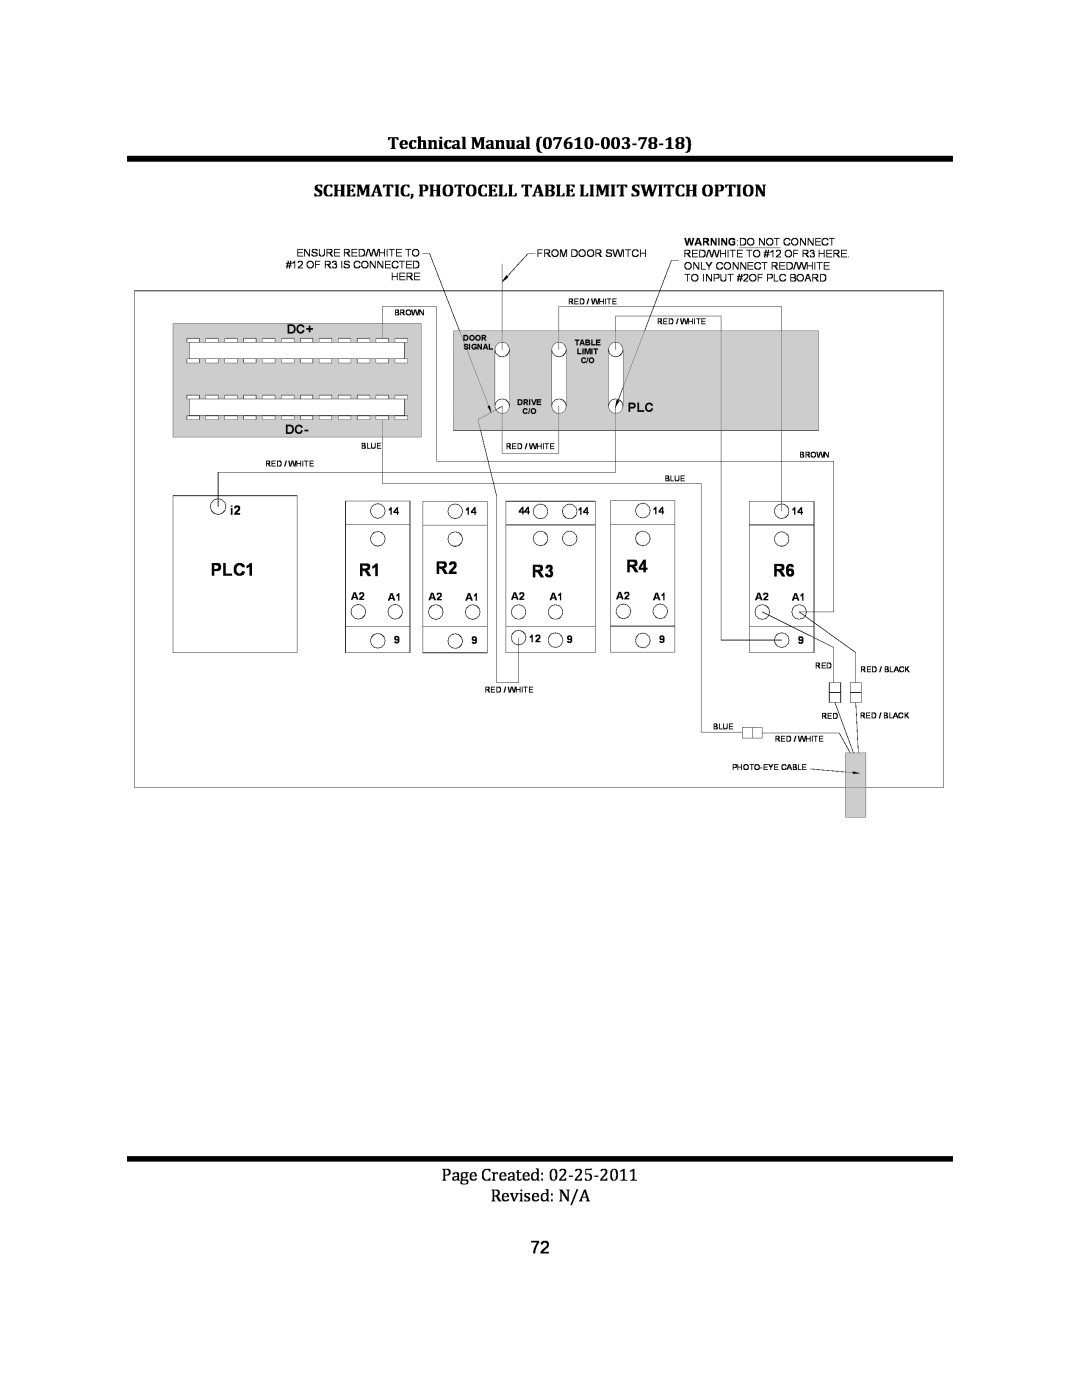 Jackson CREW 66S, CREW 44S manual Technical Manual 07610‐003‐78‐18, Schematic, Photocell Table Limit Switch Option, PLC1 